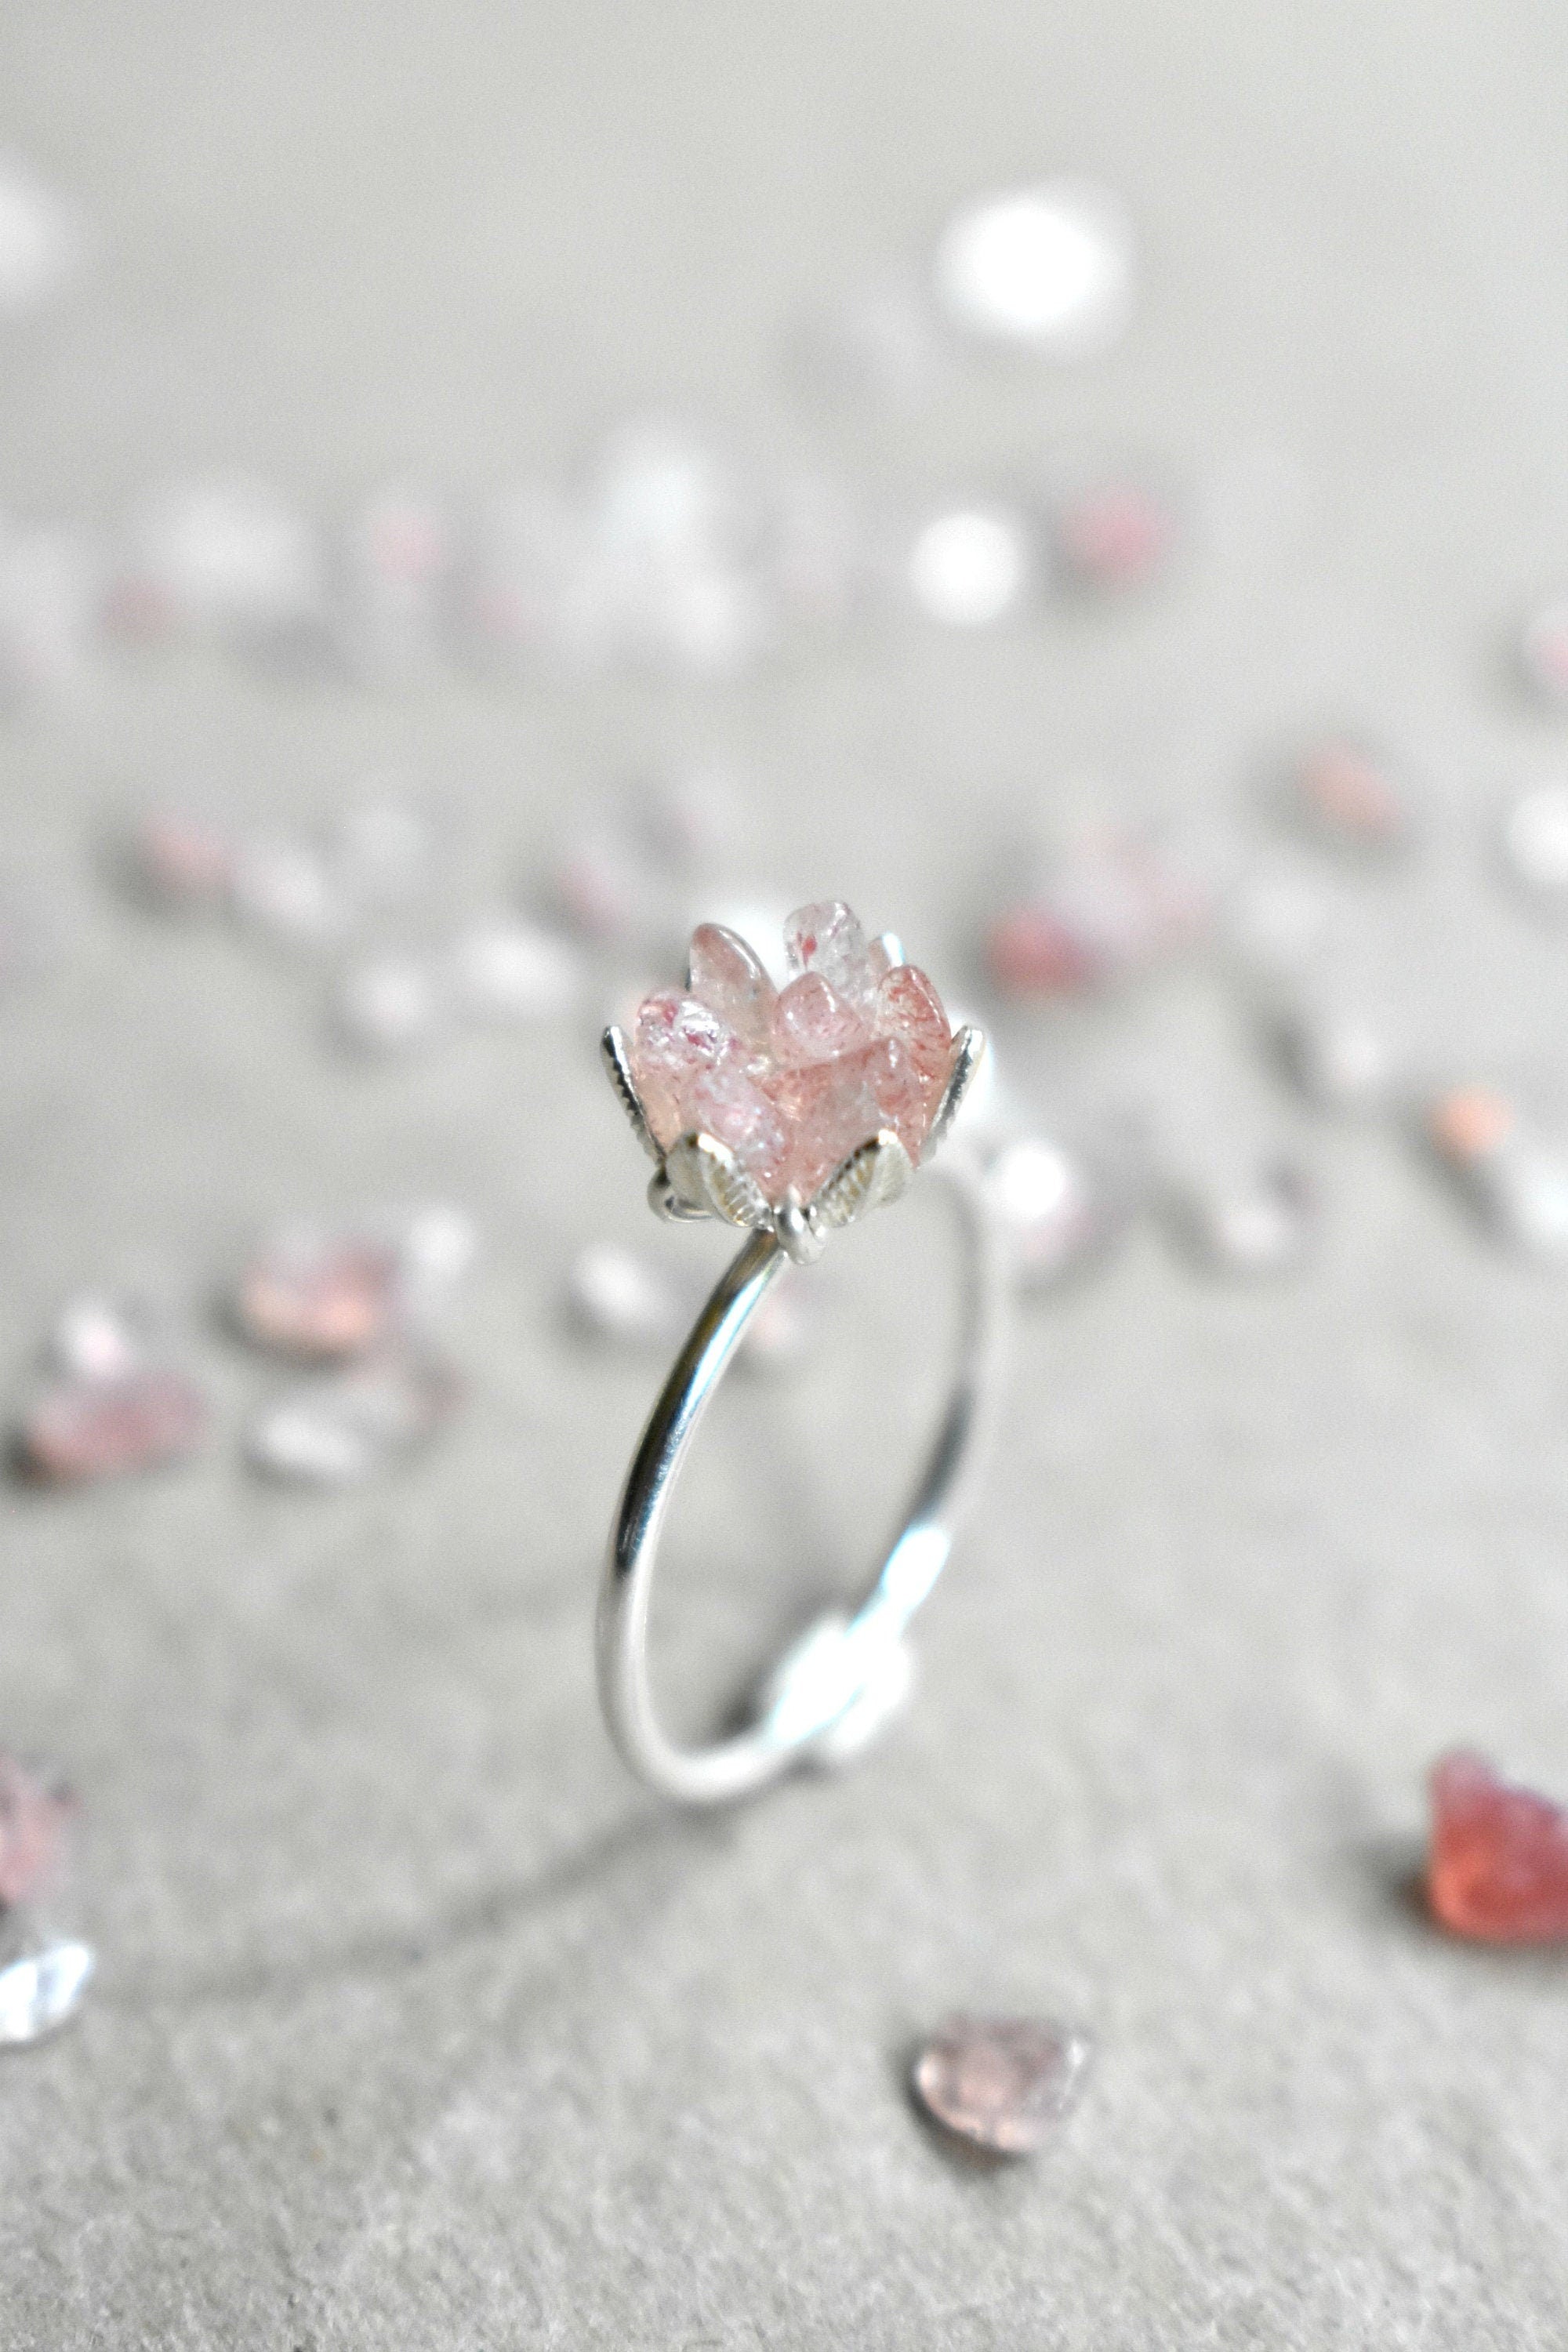 Holiday Proposal Strawberry Quartz Ring for Girlfriend, Pink and Silver Jewelry, Pink Crystal Party Ring for Date Night, Lotus Flower Ring